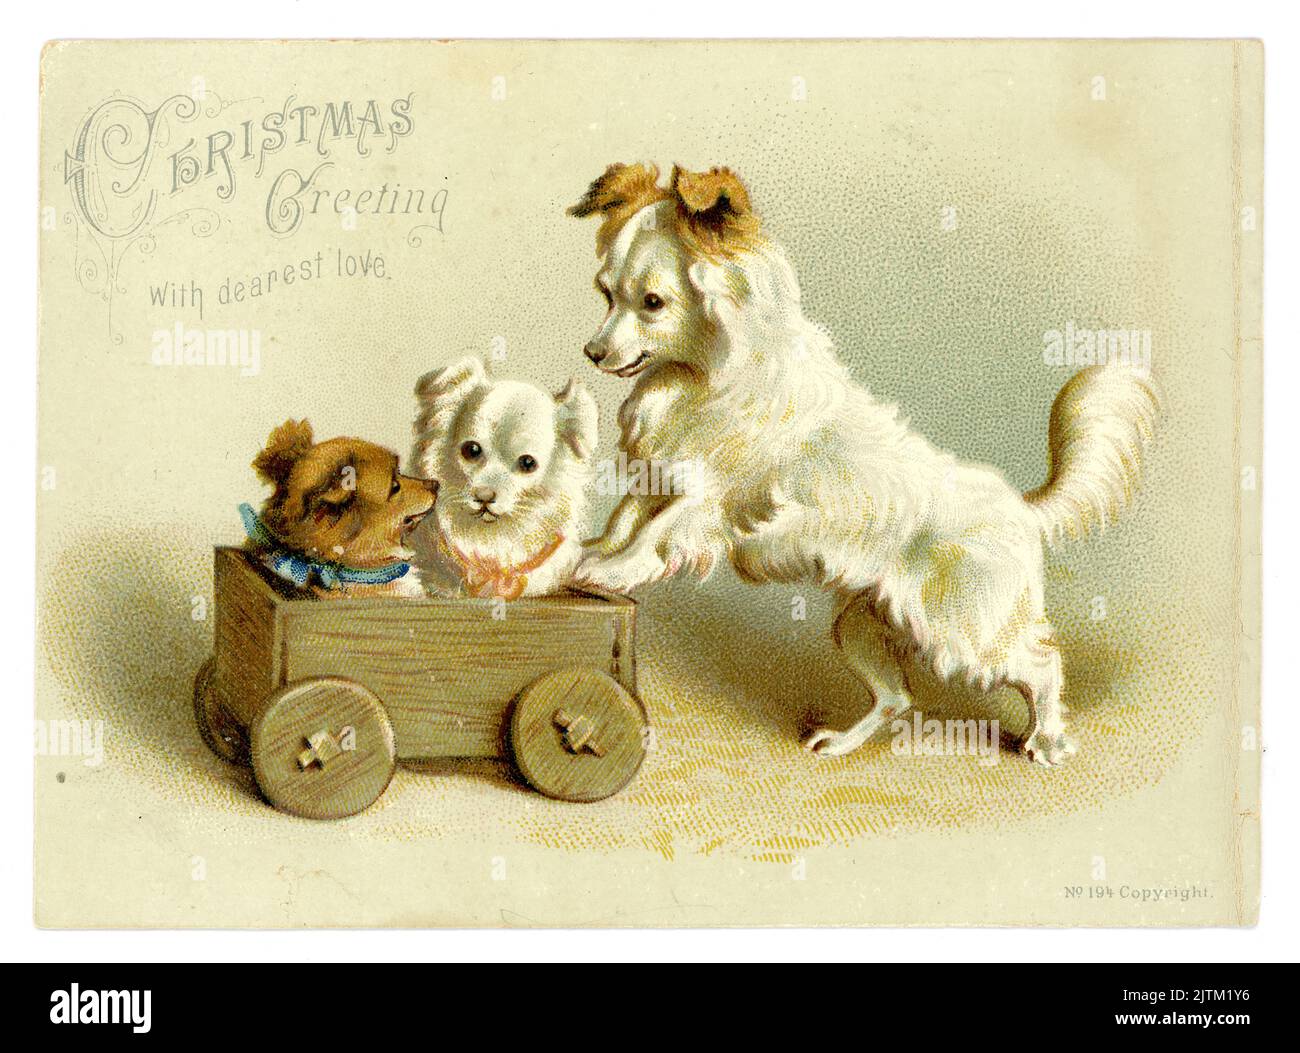 Originall Victorian greetings card of cute dog pushing two puppies in a toy wooden truck, Christmas Greeting with dearest love, circa 1890's, U.K. Stock Photo